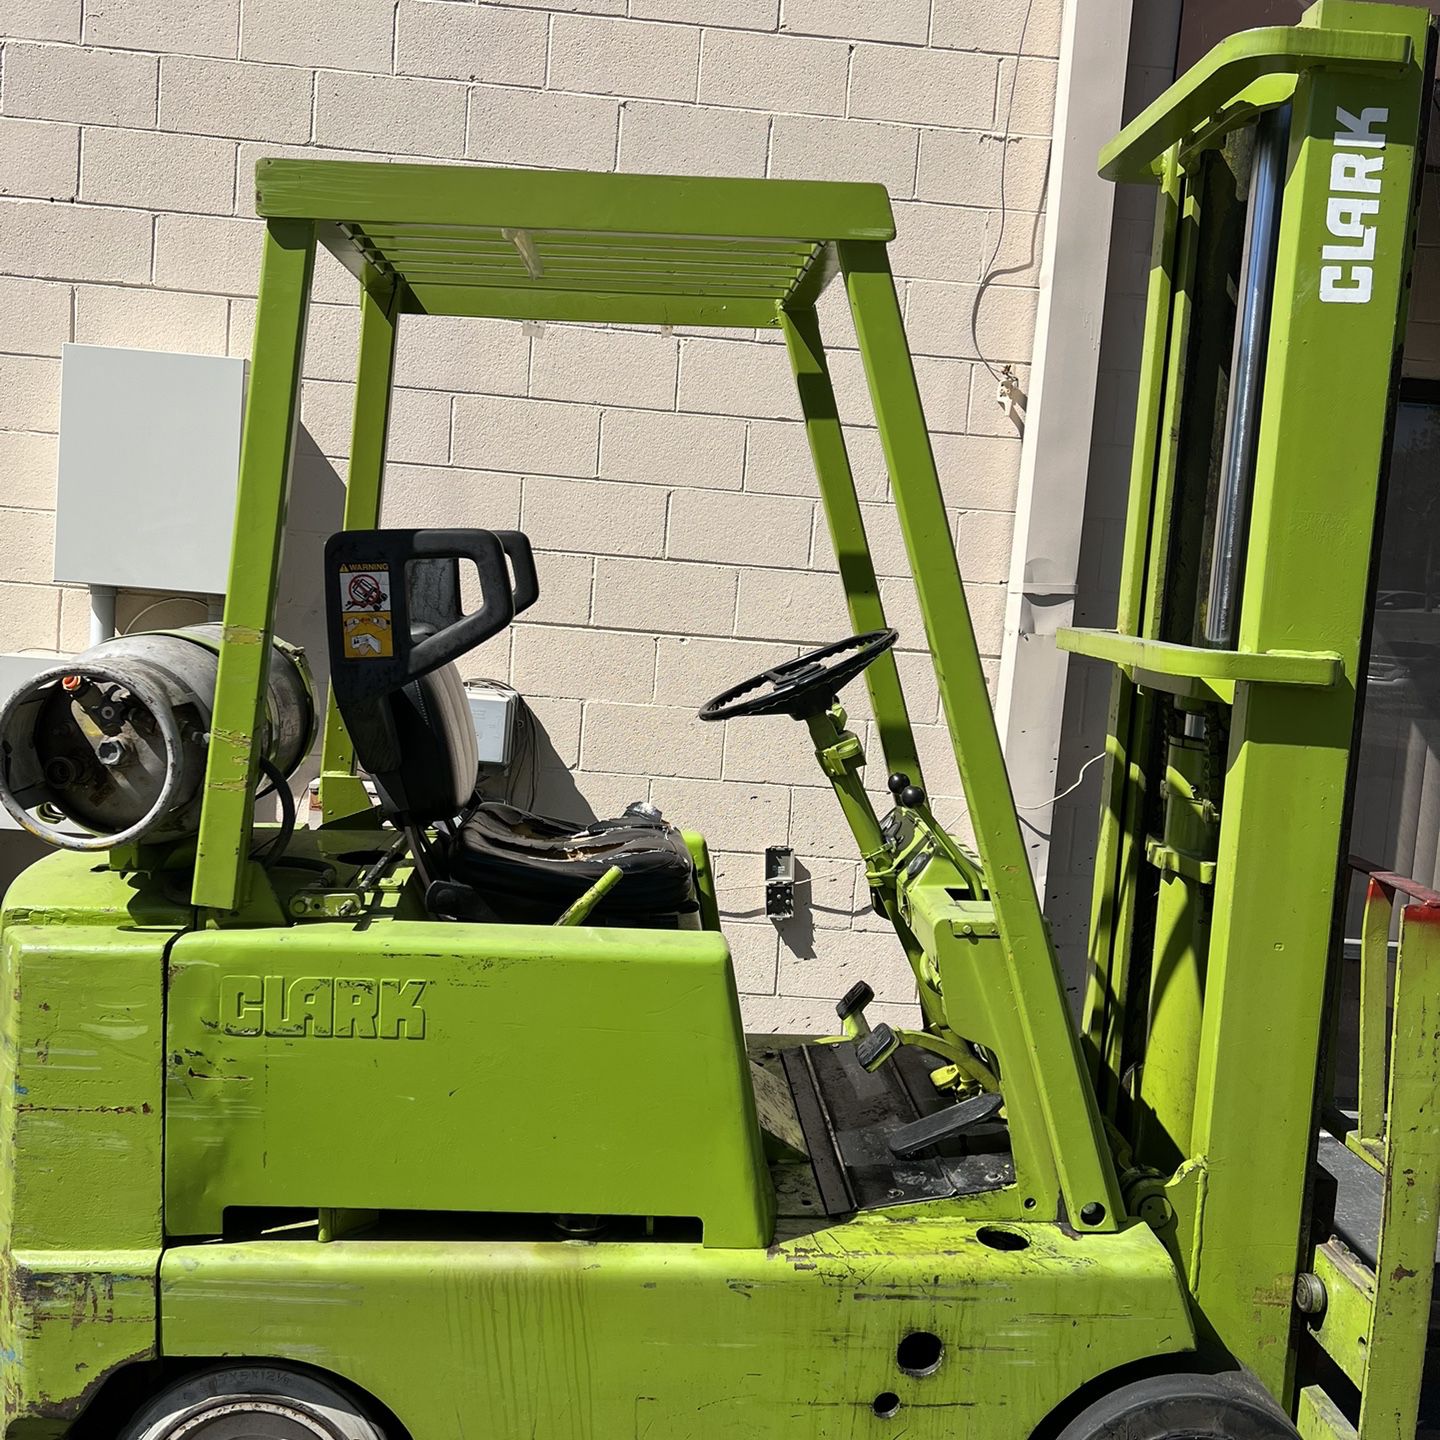 3 Clark Forklifts Selling As Is! 